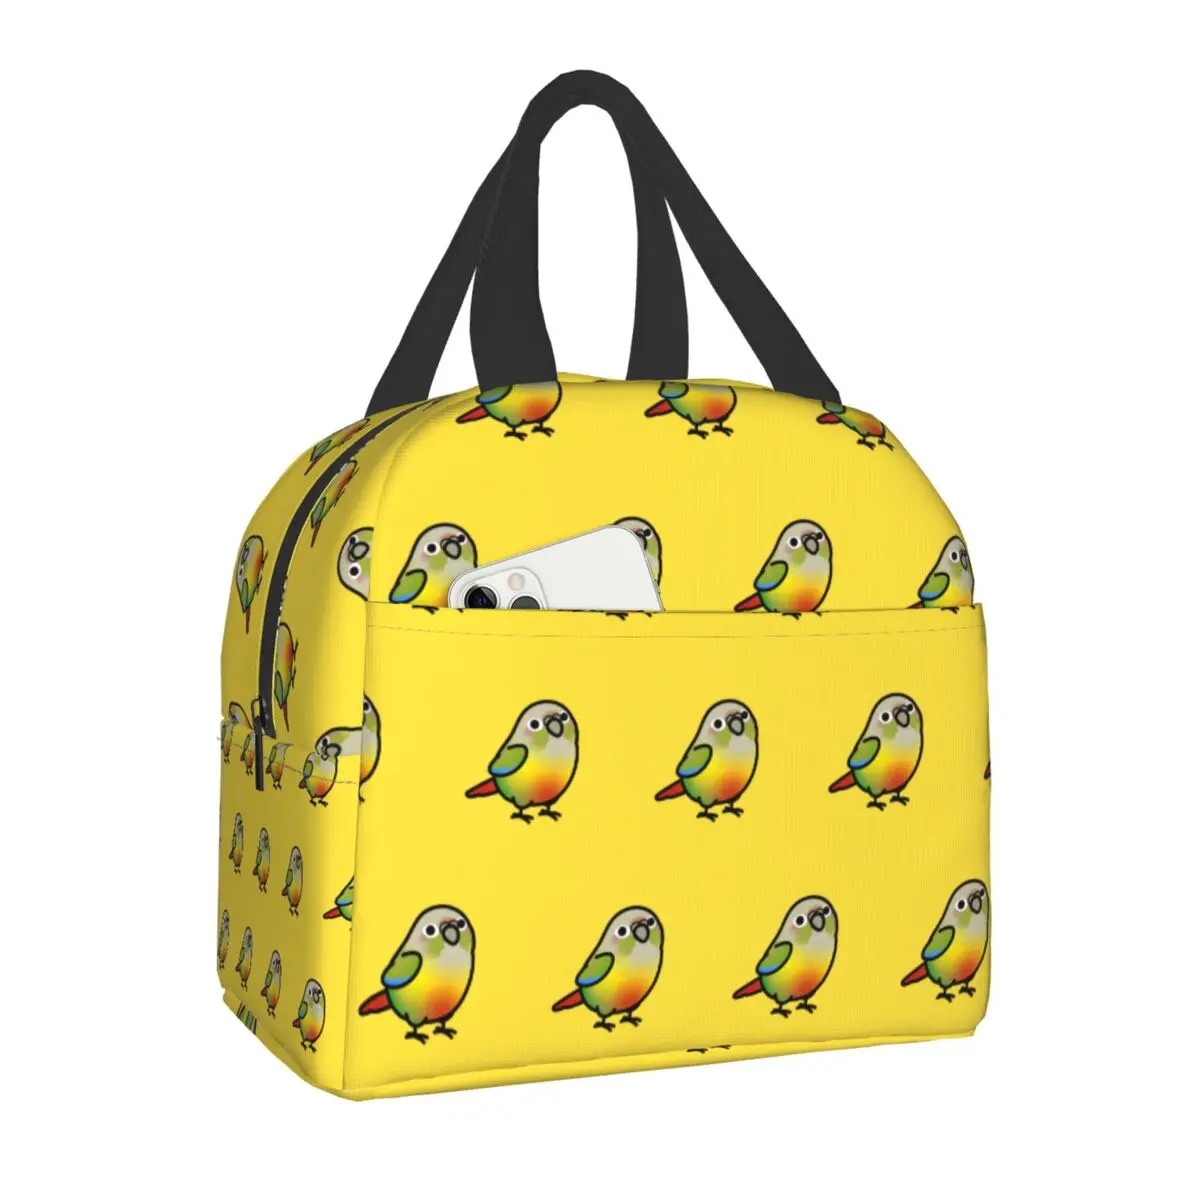 

Chubby Pineapple Green Cheek Conure Insulated Lunch Bag Portable Parrot Bird Thermal Cooler Lunch Box for Women Kids School